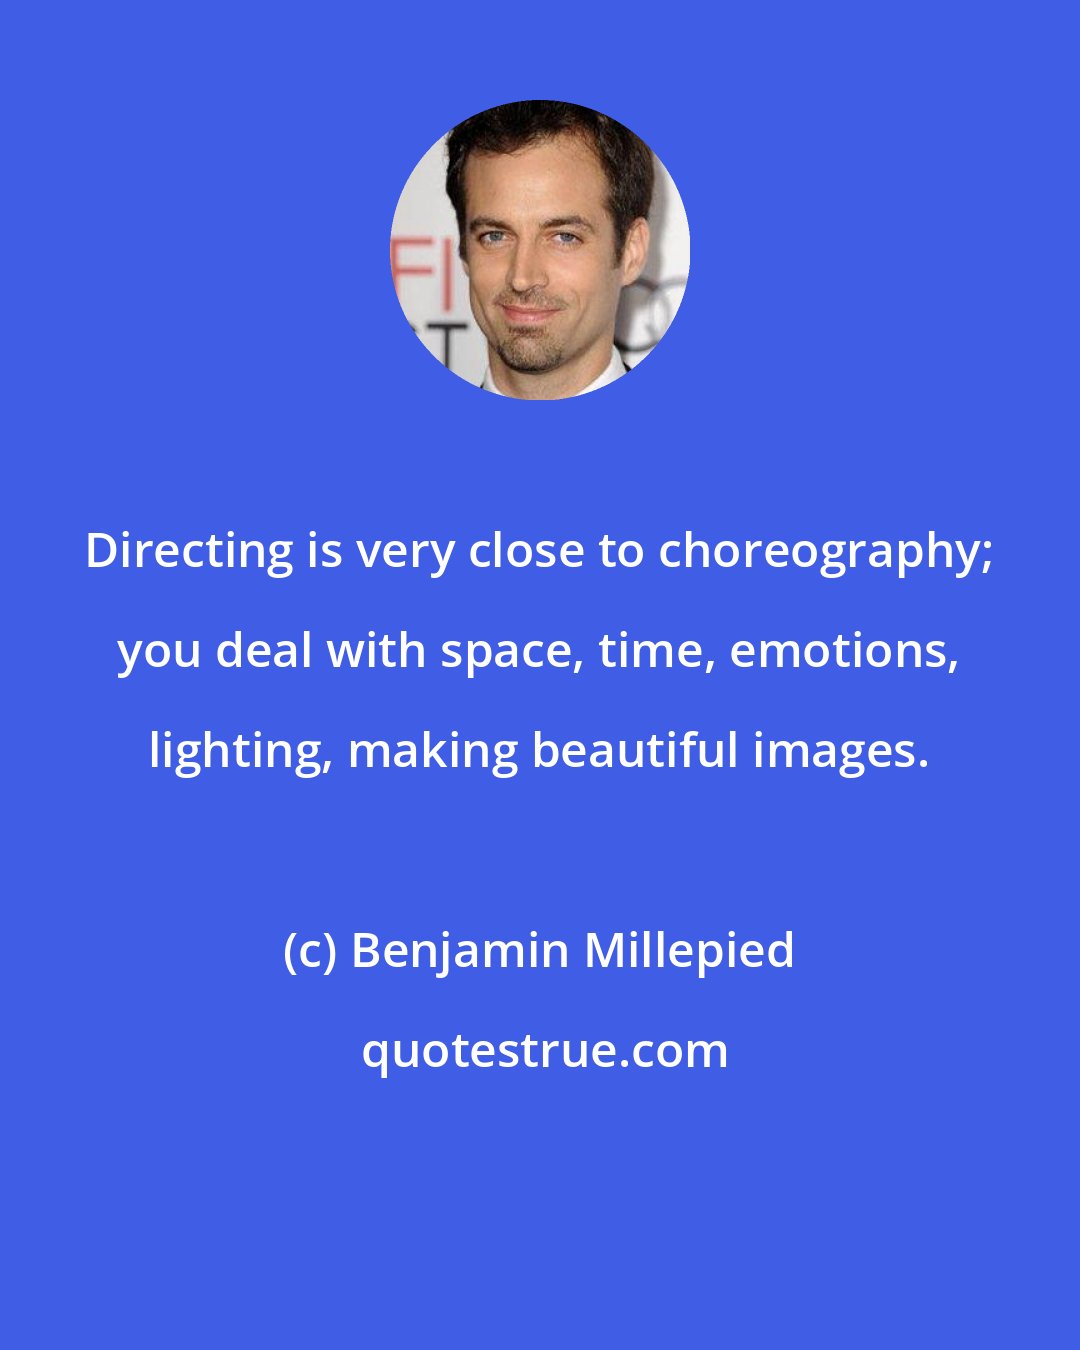 Benjamin Millepied: Directing is very close to choreography; you deal with space, time, emotions, lighting, making beautiful images.